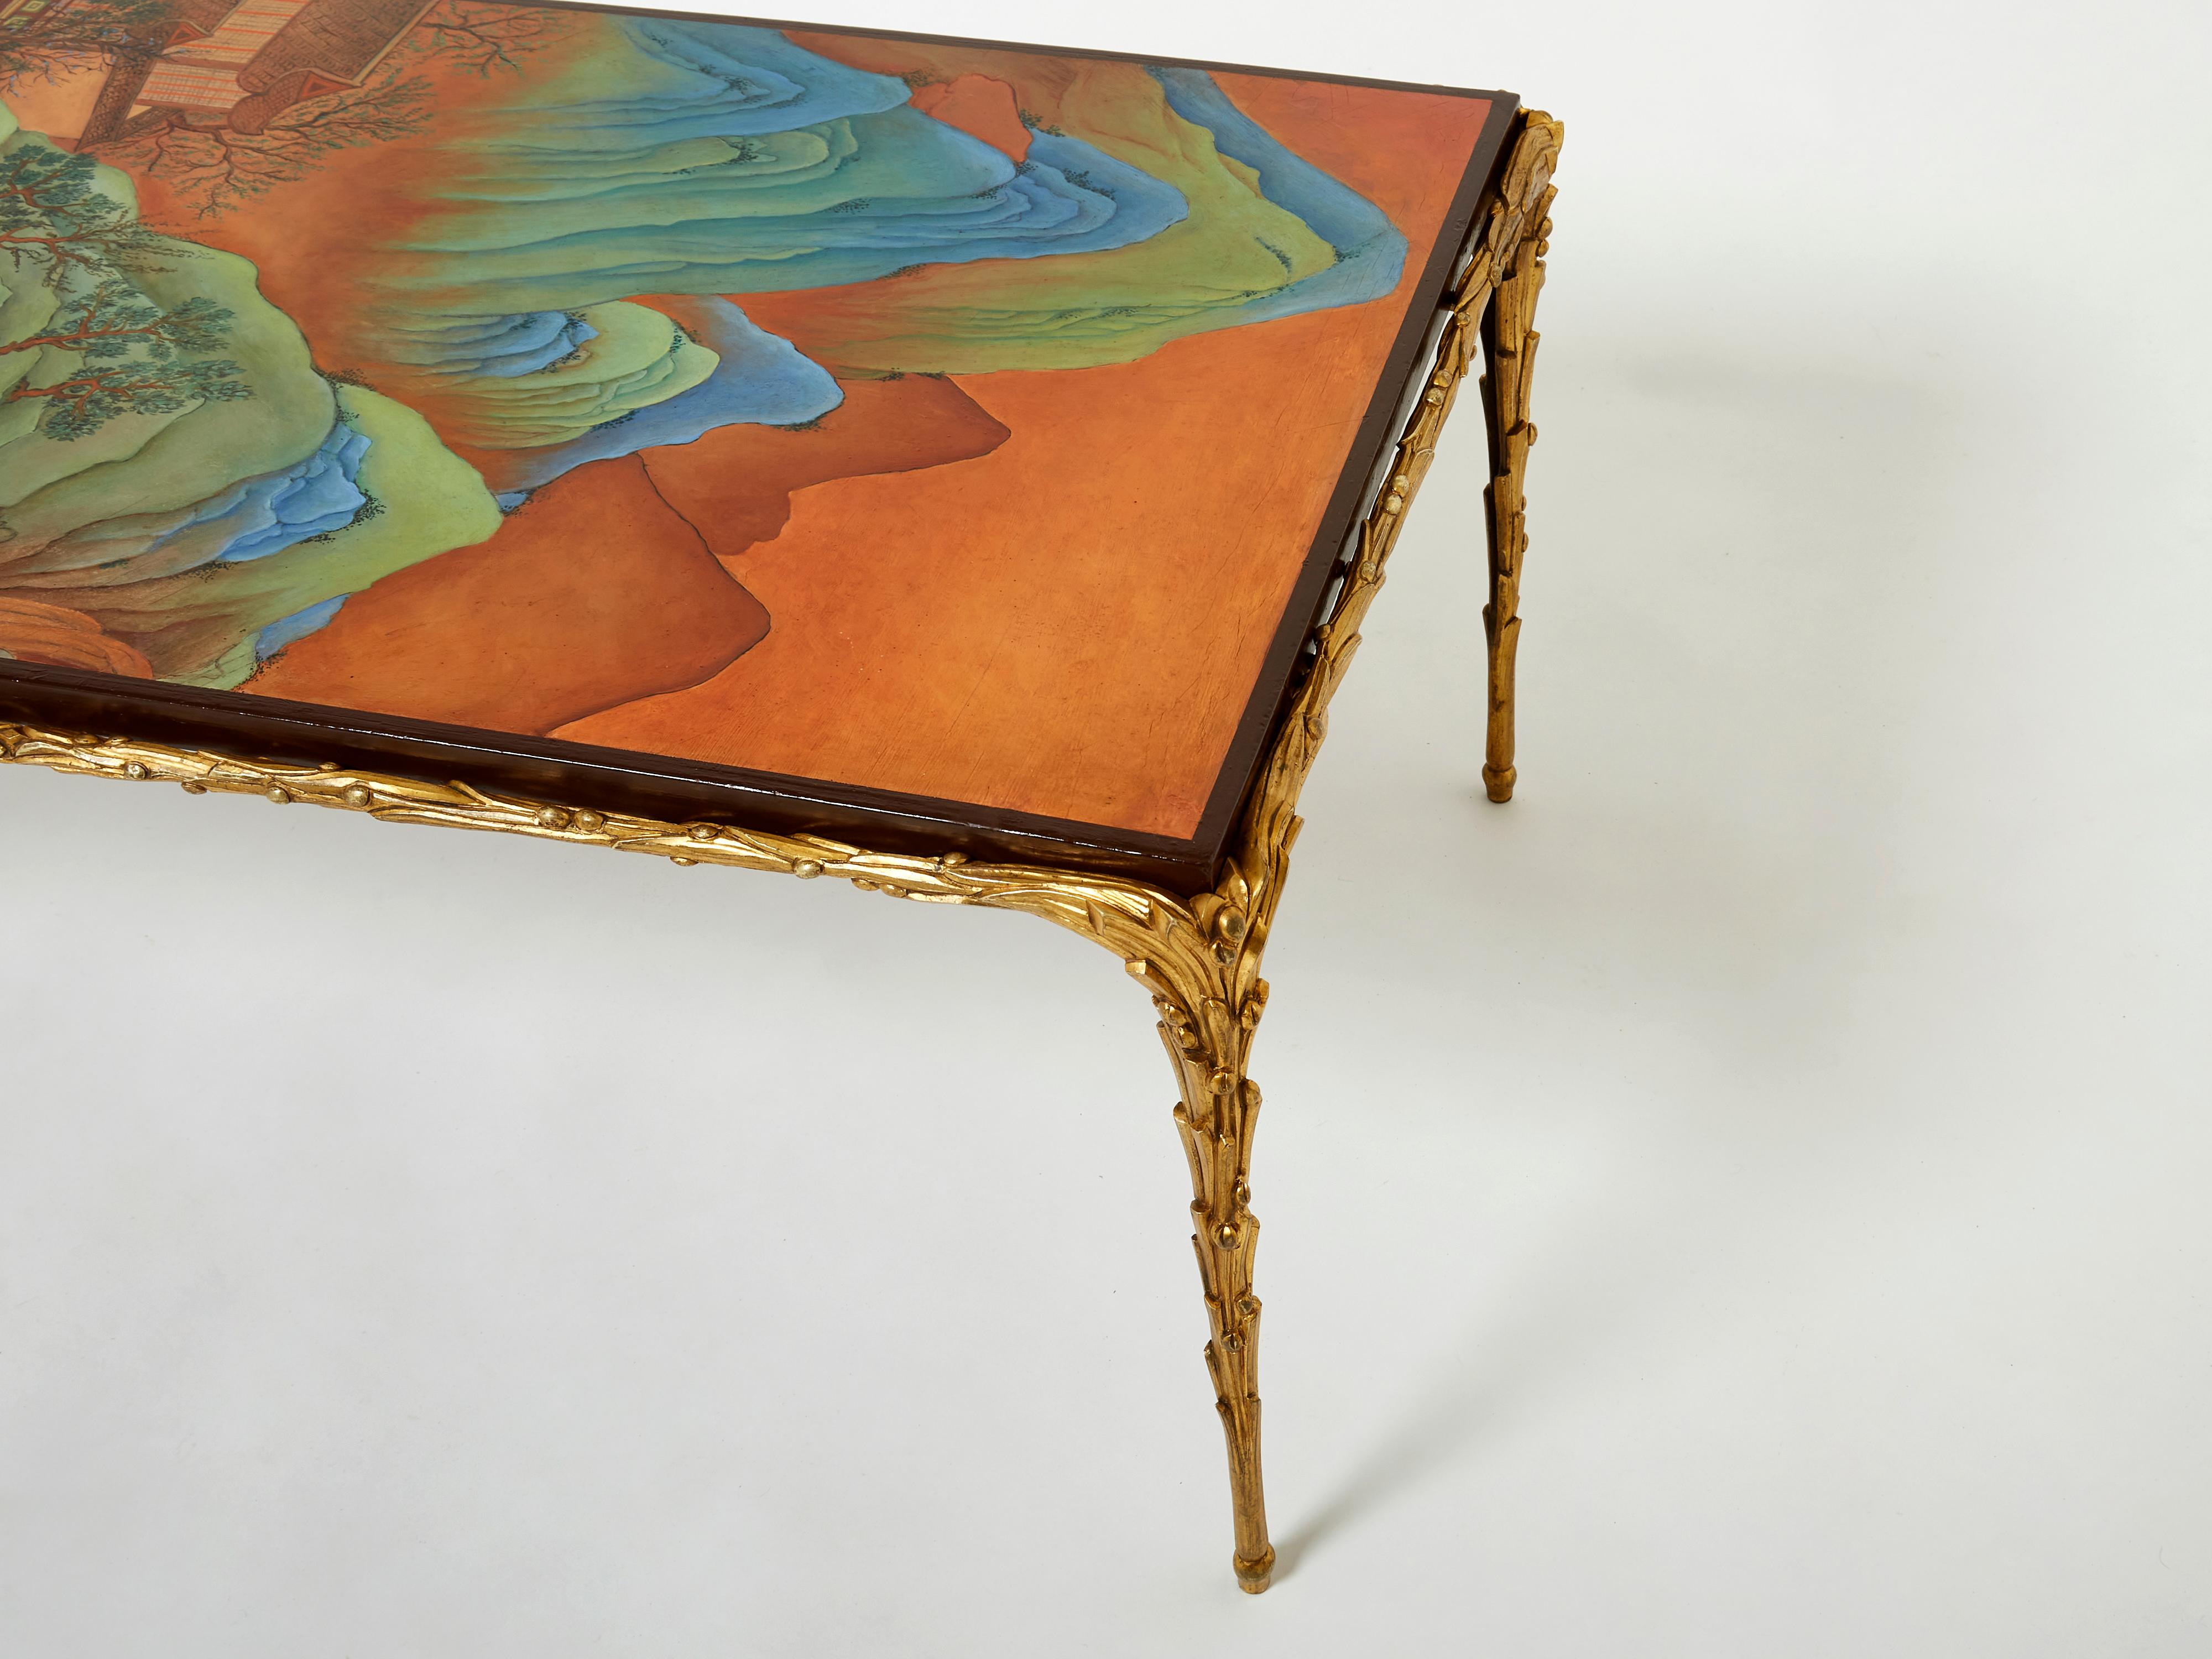 Maison Baguès foliage Bronze Chinese Lacquered Coffee Table 1960s For Sale 4